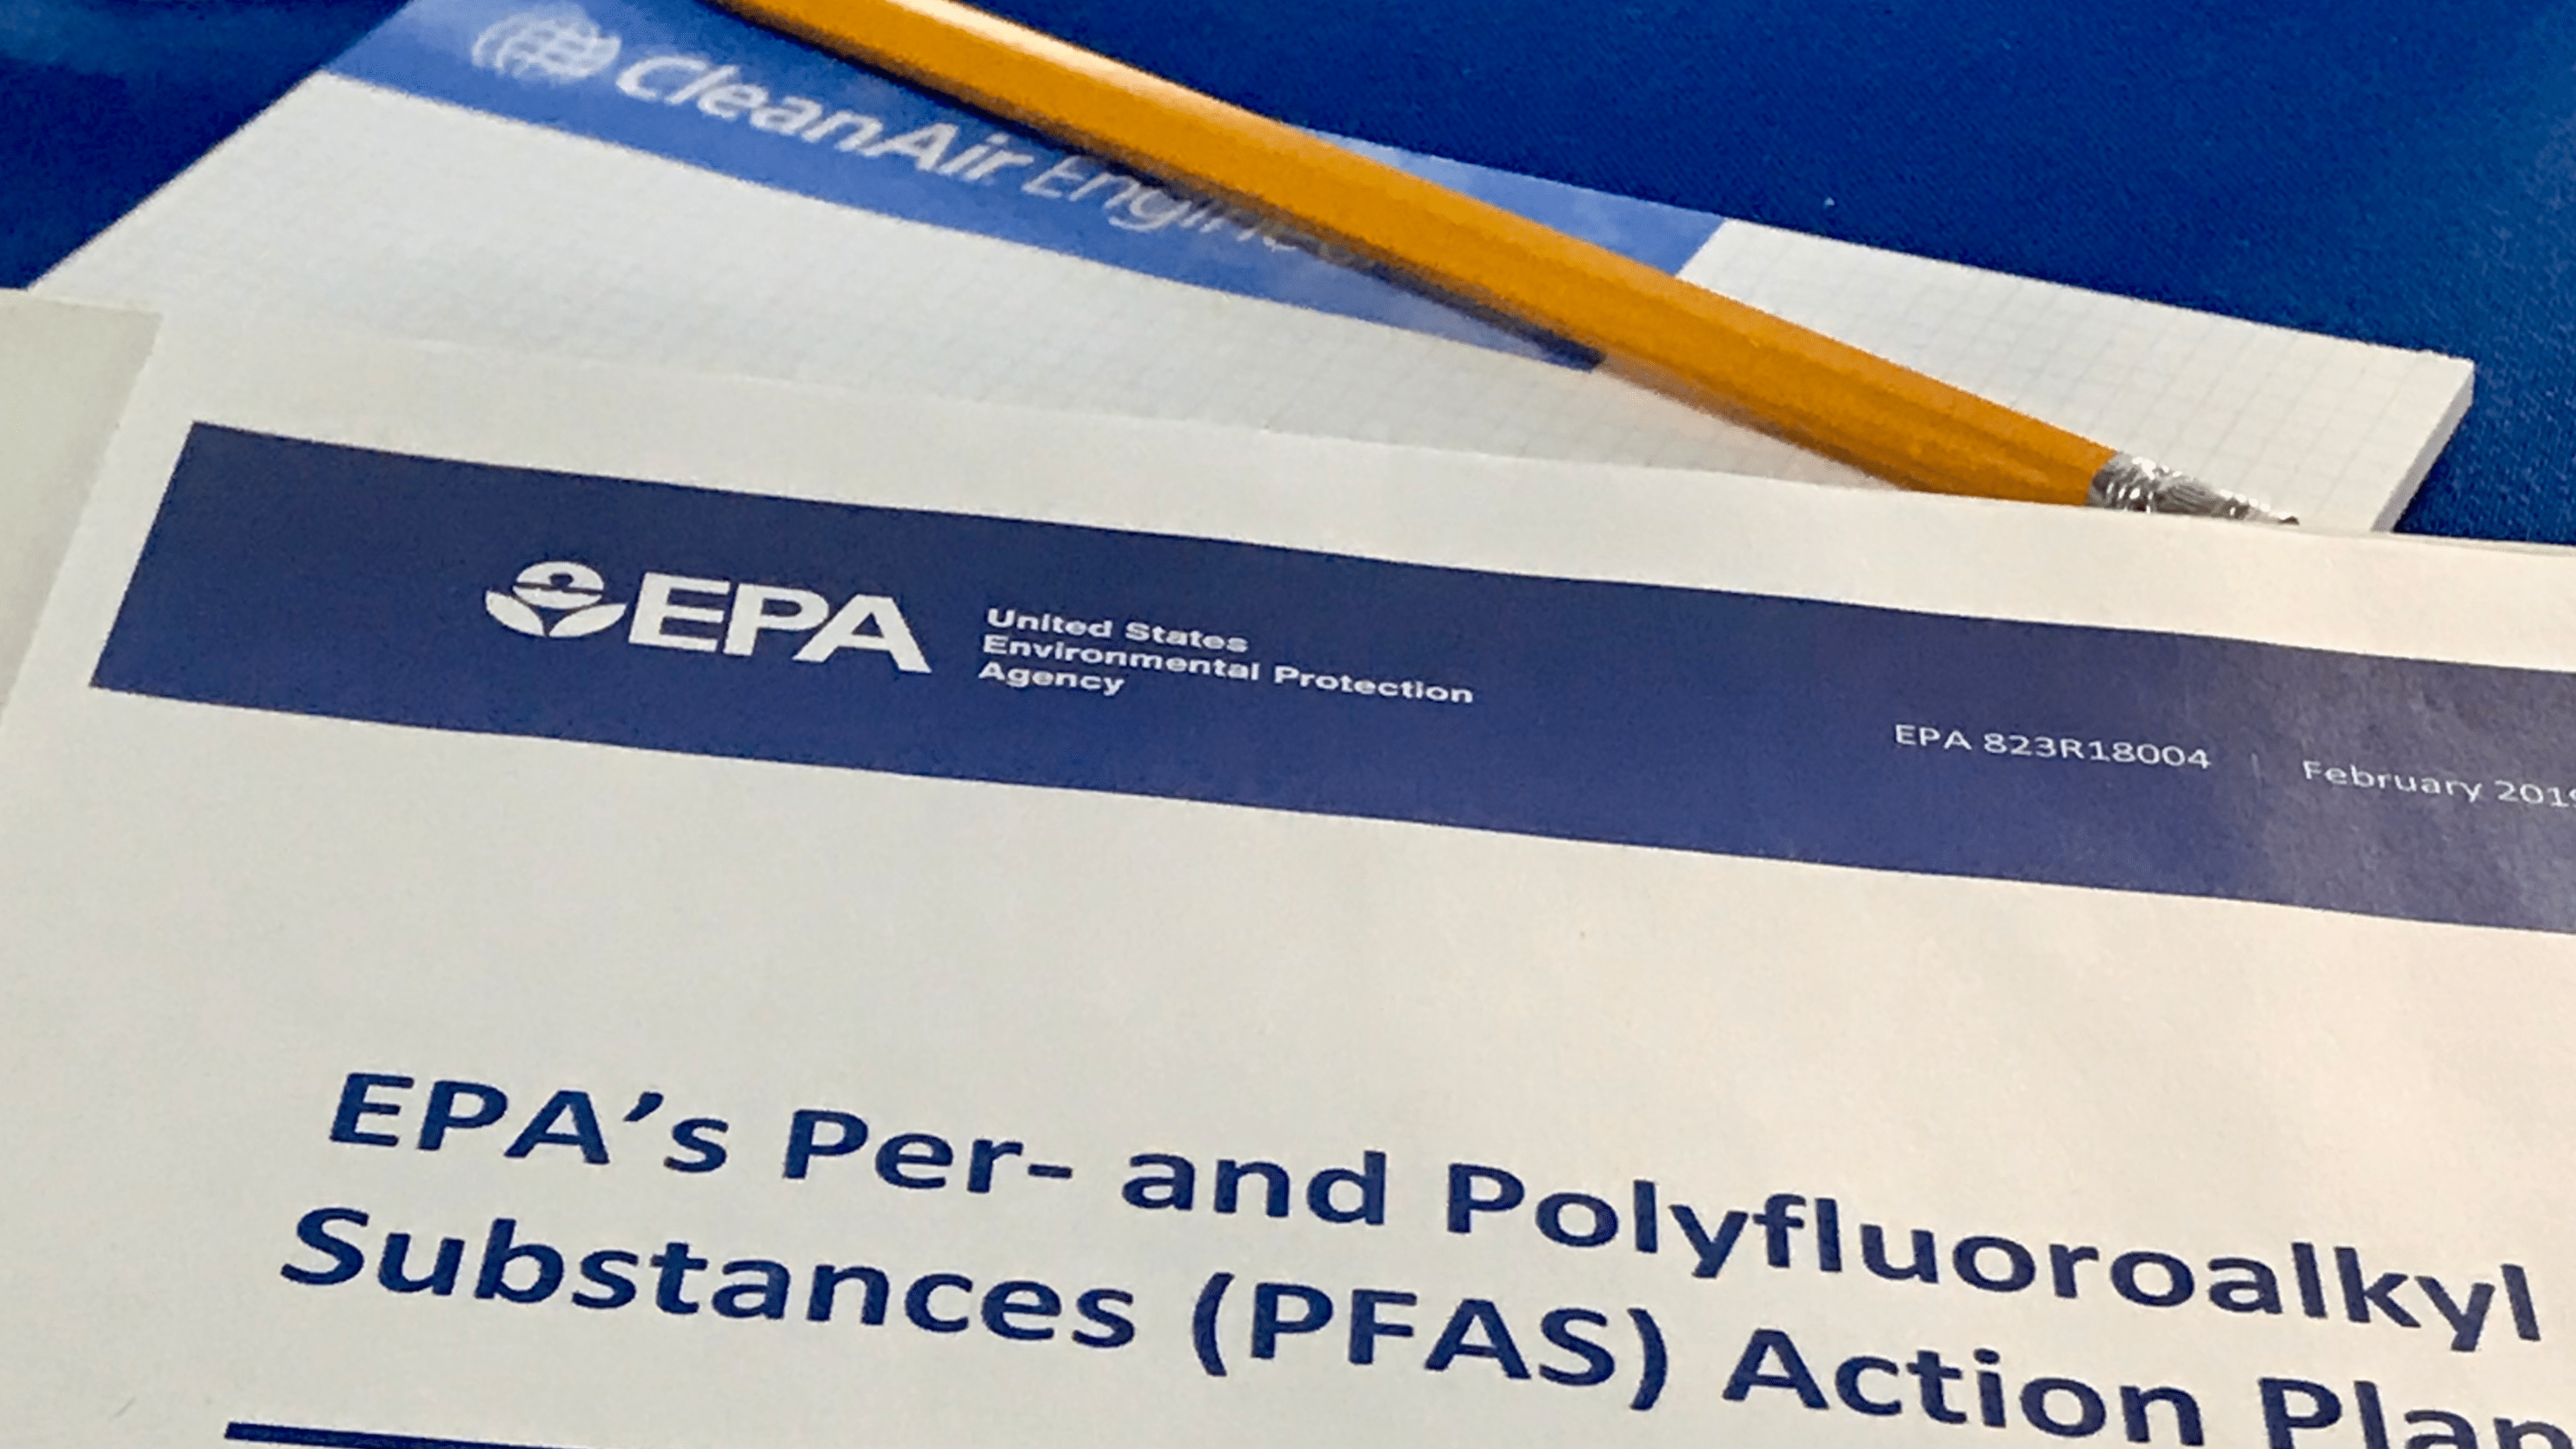 EPA Unveils its Long-Awaited Action Plan for PFAS